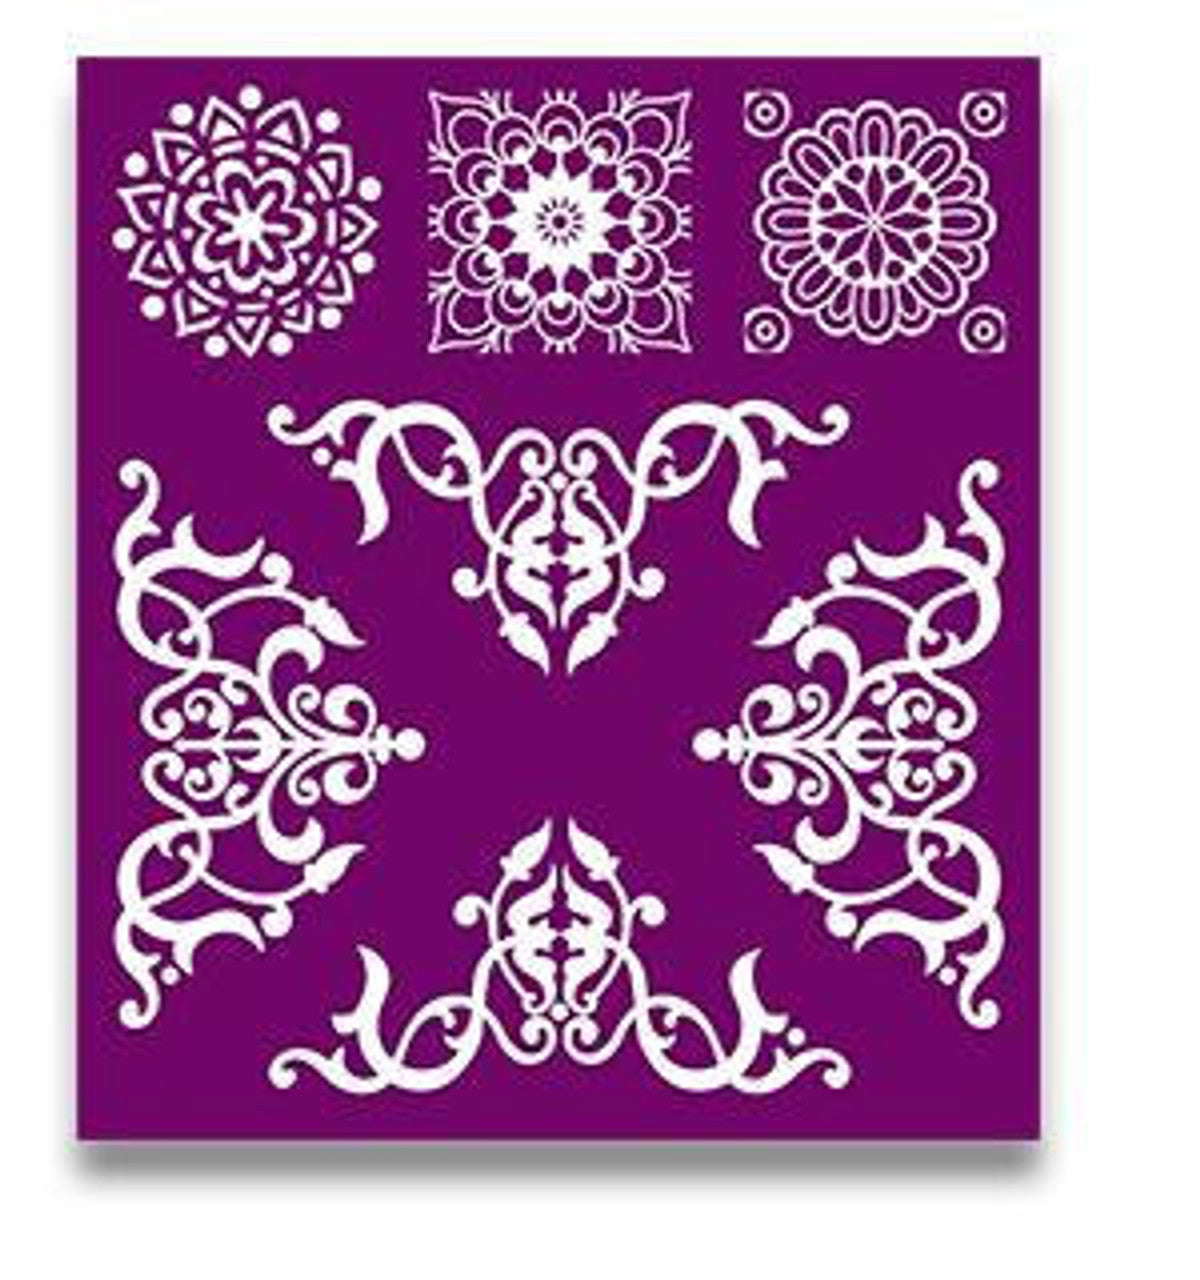 MOSAIC Silk Screen Stencils 3 designs 8" x 10" by Belles and Whistles